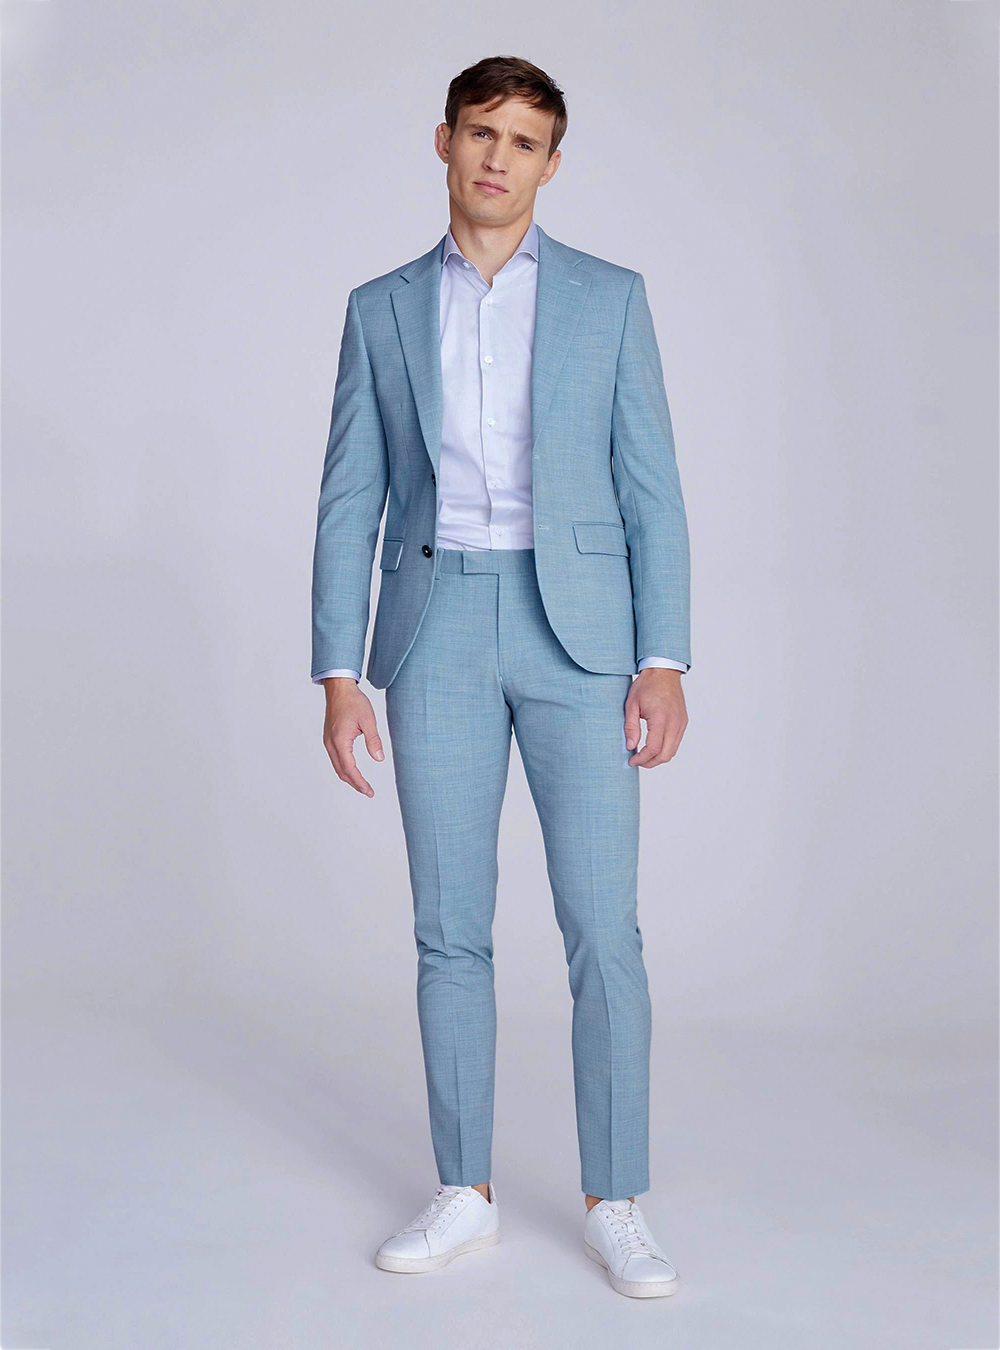 Light blue suit, light blue shirt and white sneakers